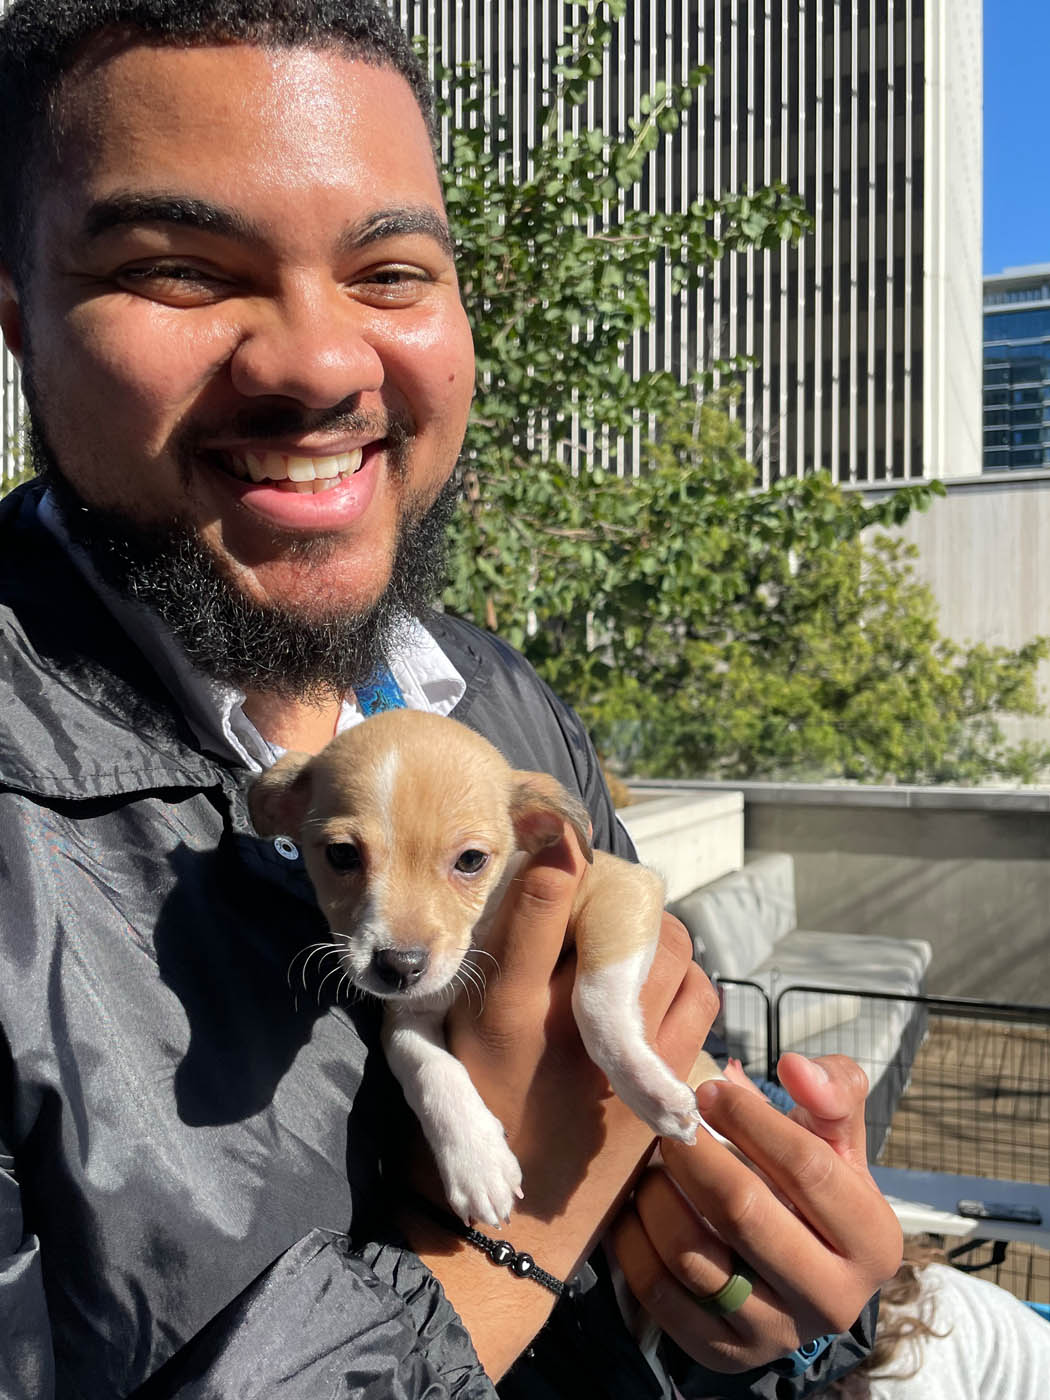 How Puppy Love Brought Joy and Appreciation to LPC Tenants